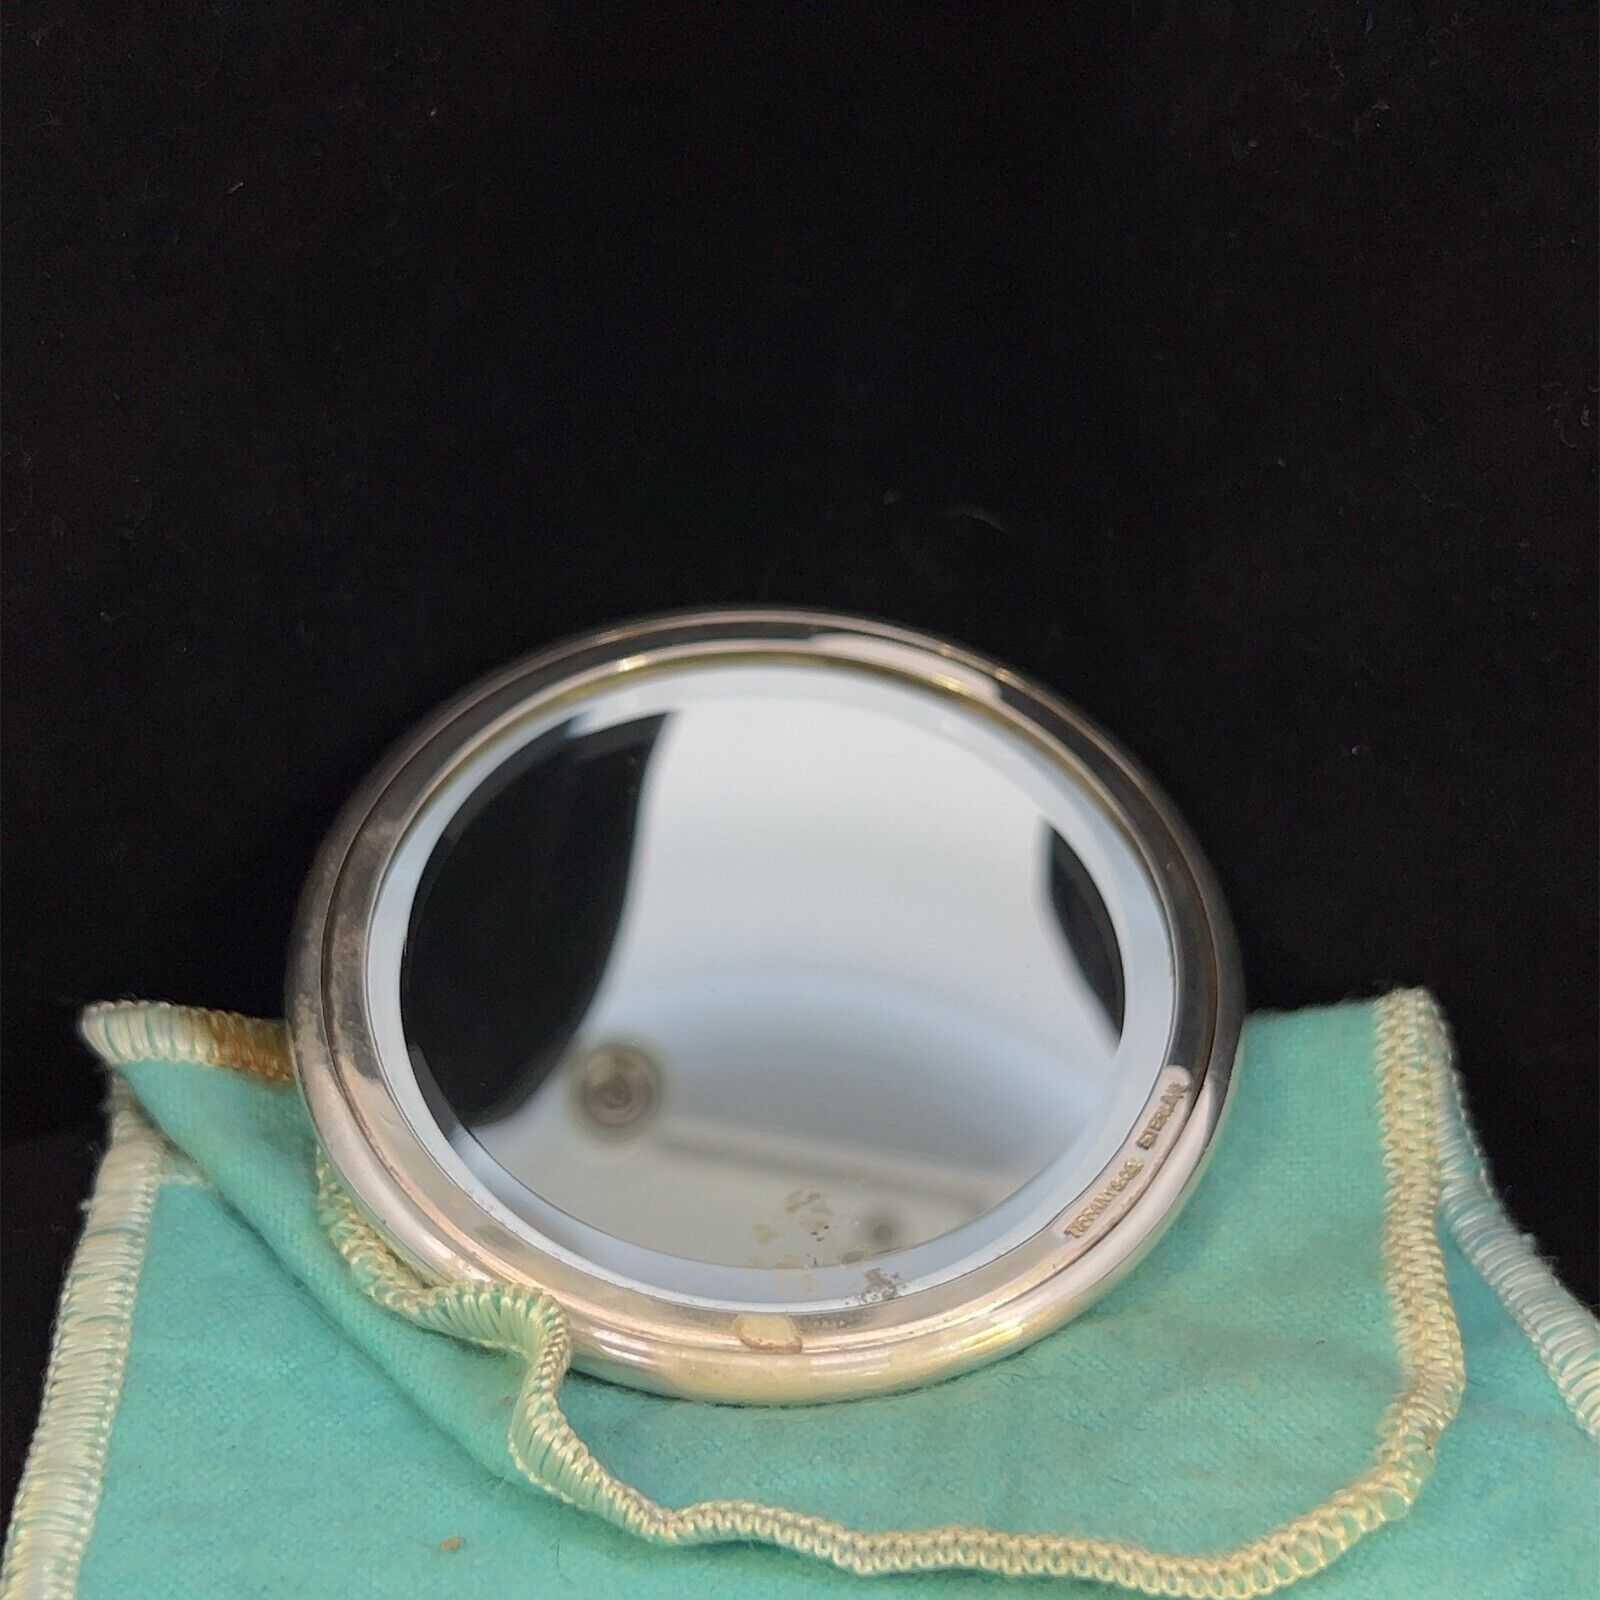 Vintage Tiffany & Co Sterling Silver Compact Round Purse Mirror w/ Pouch